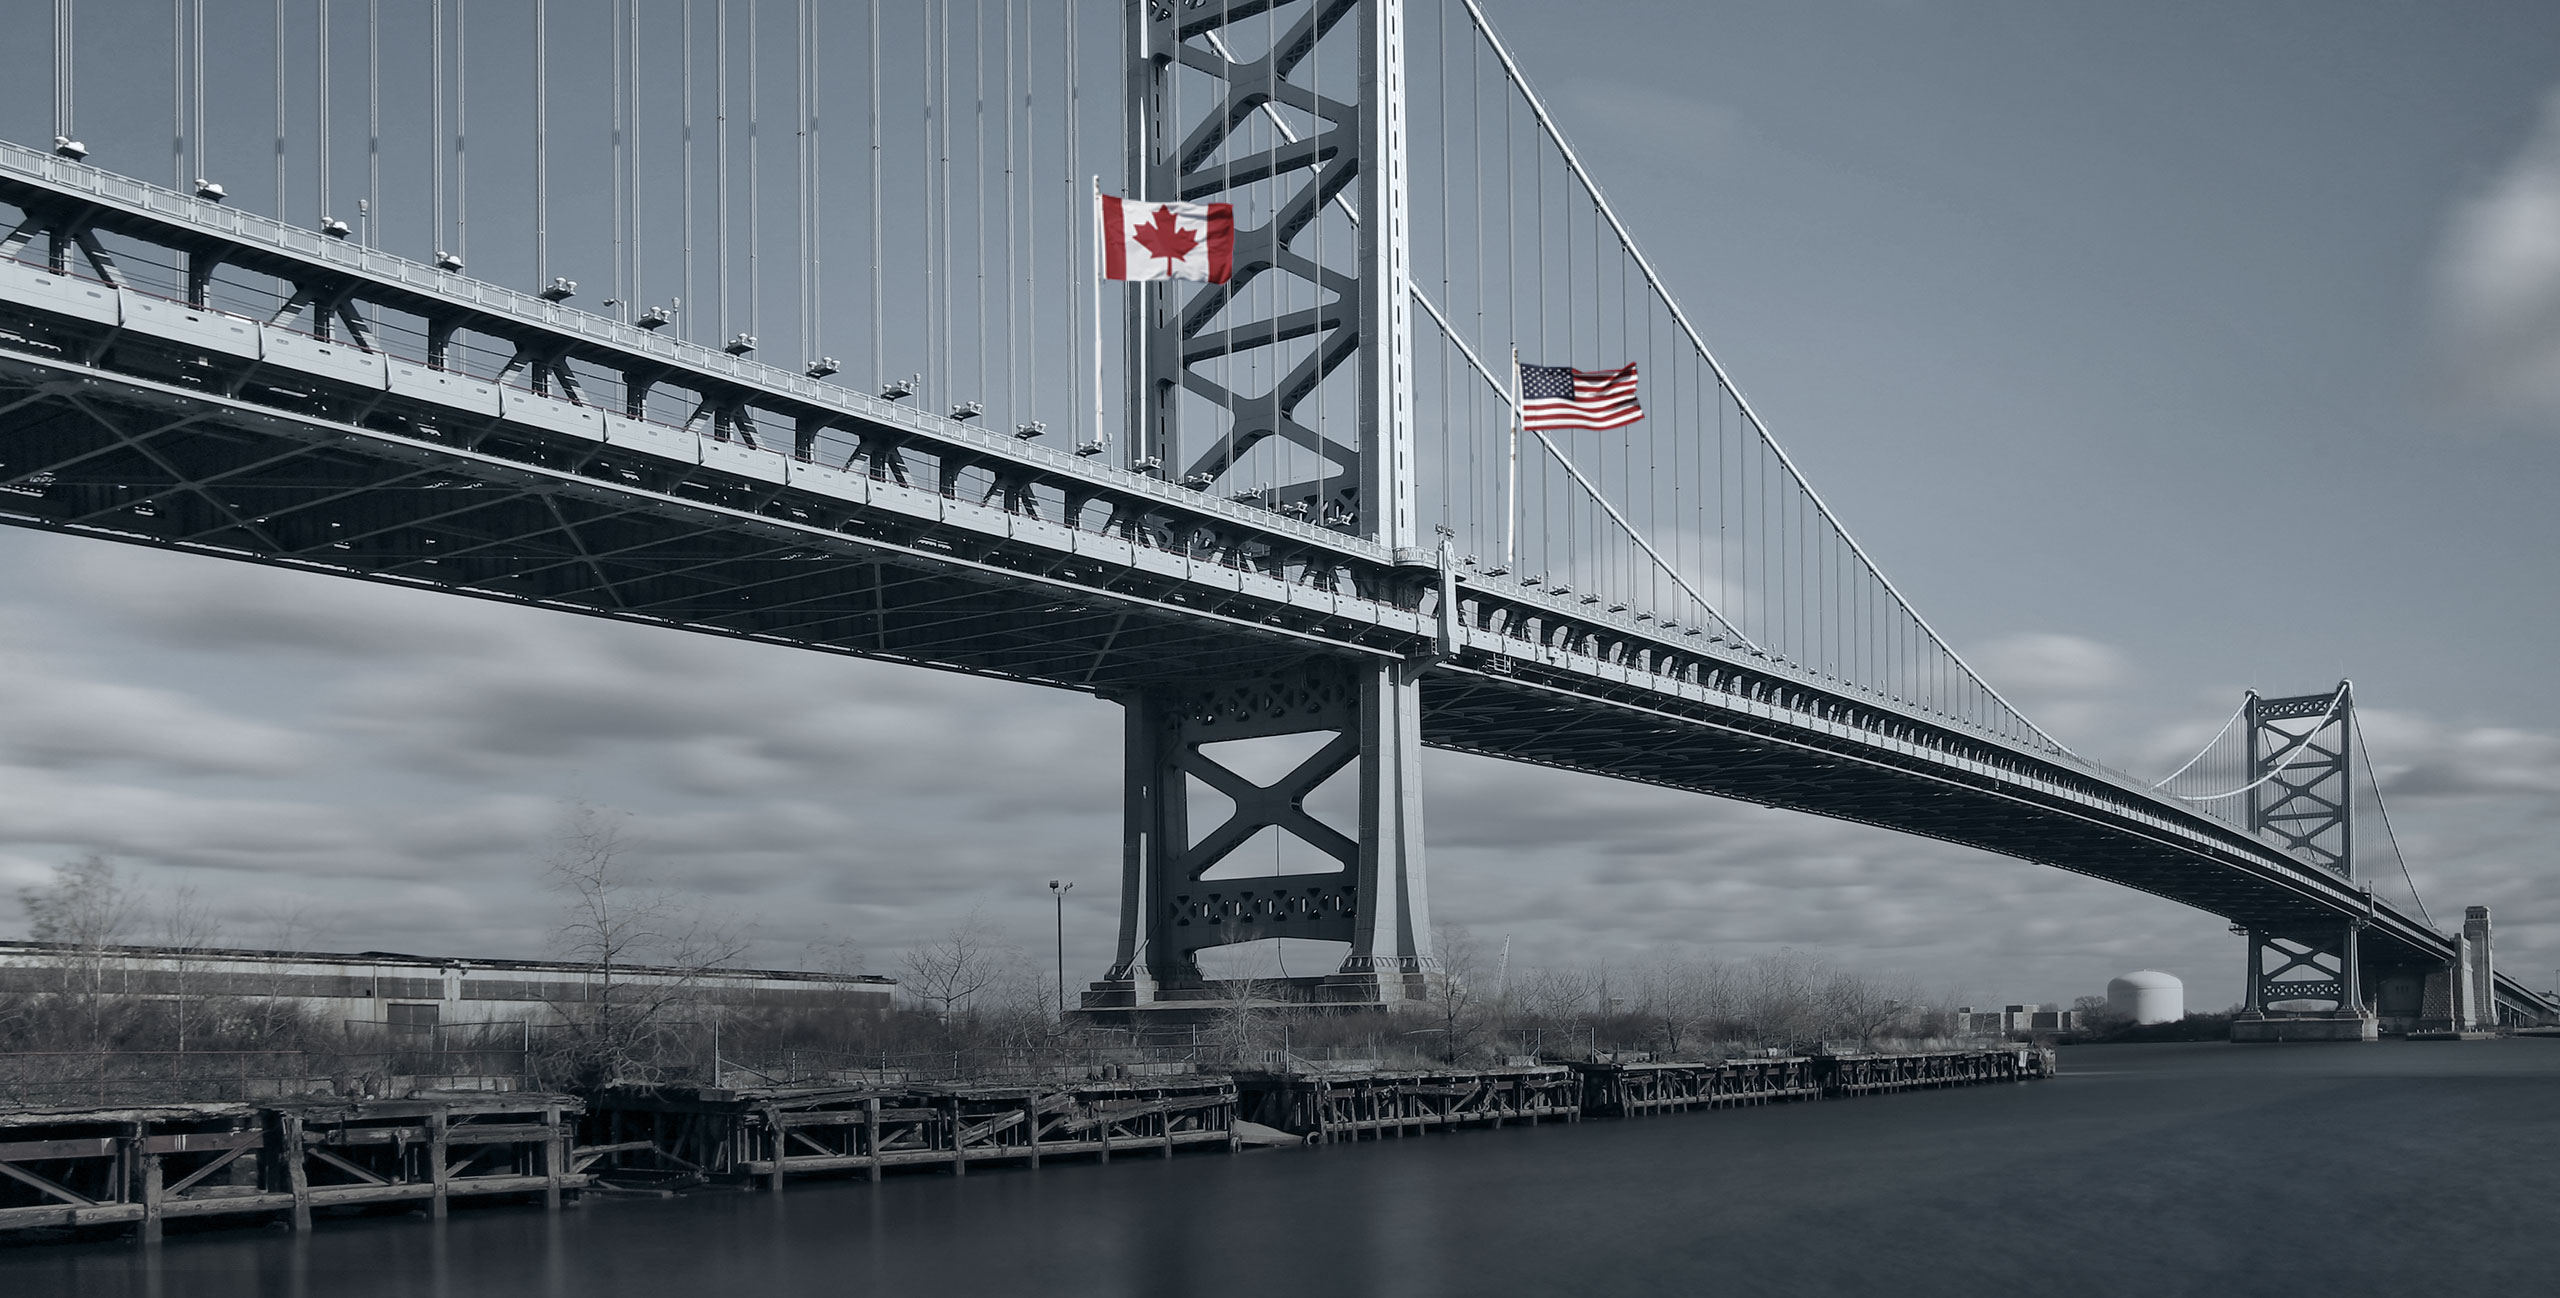 Bridge spanning between Canada and the USA